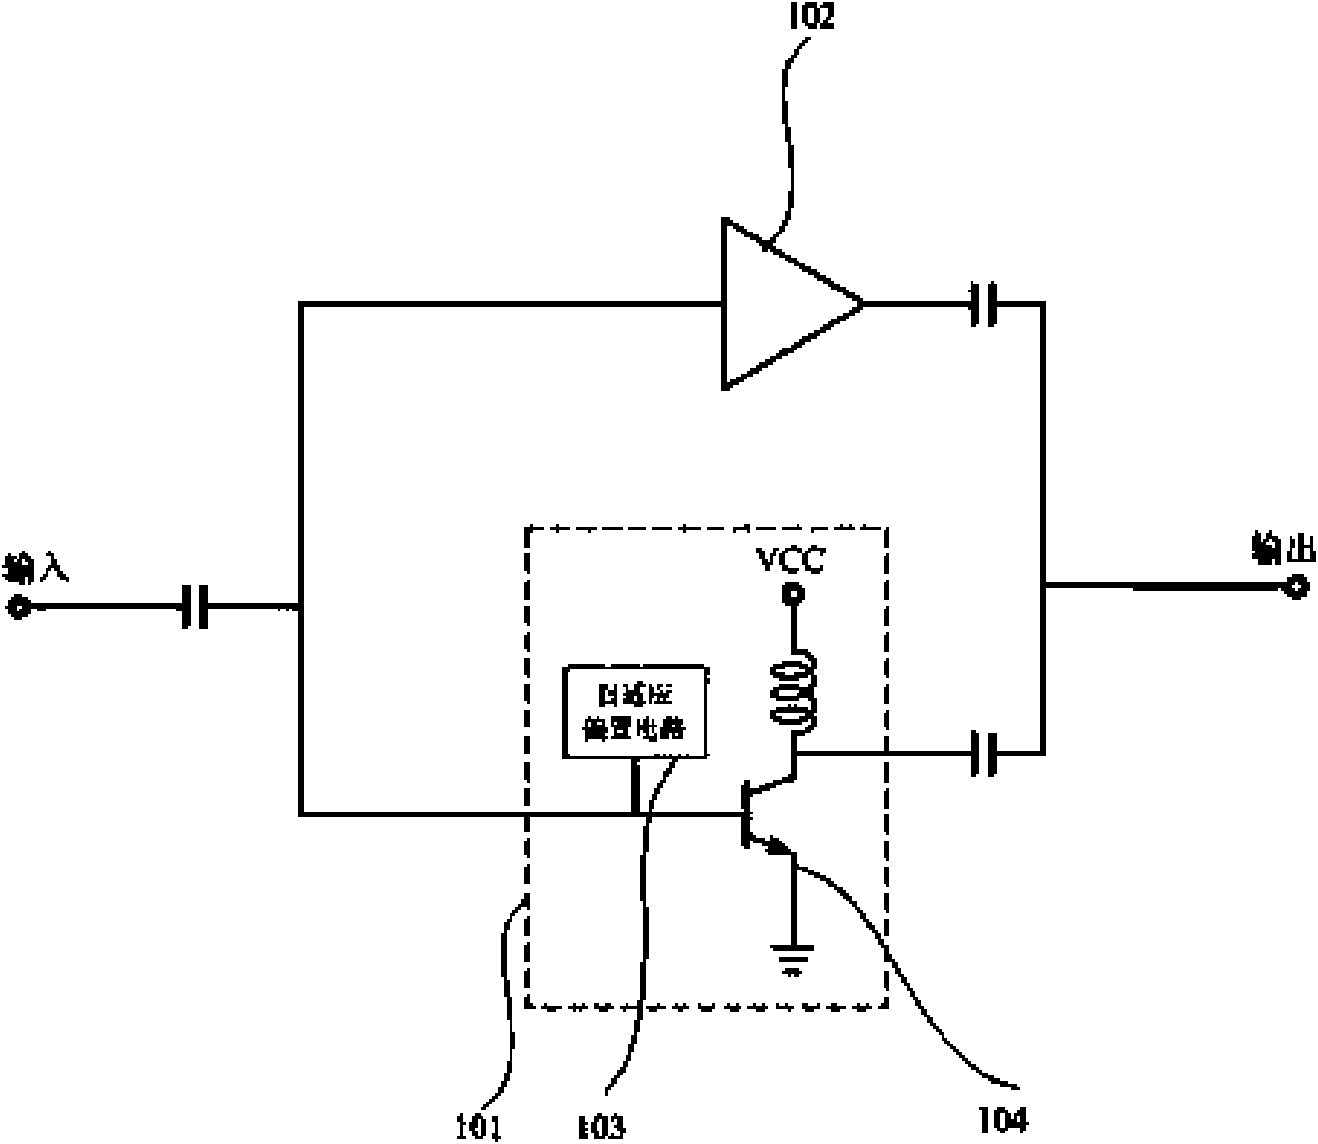 Radio-frequency power amplifier and a front-end transmitter